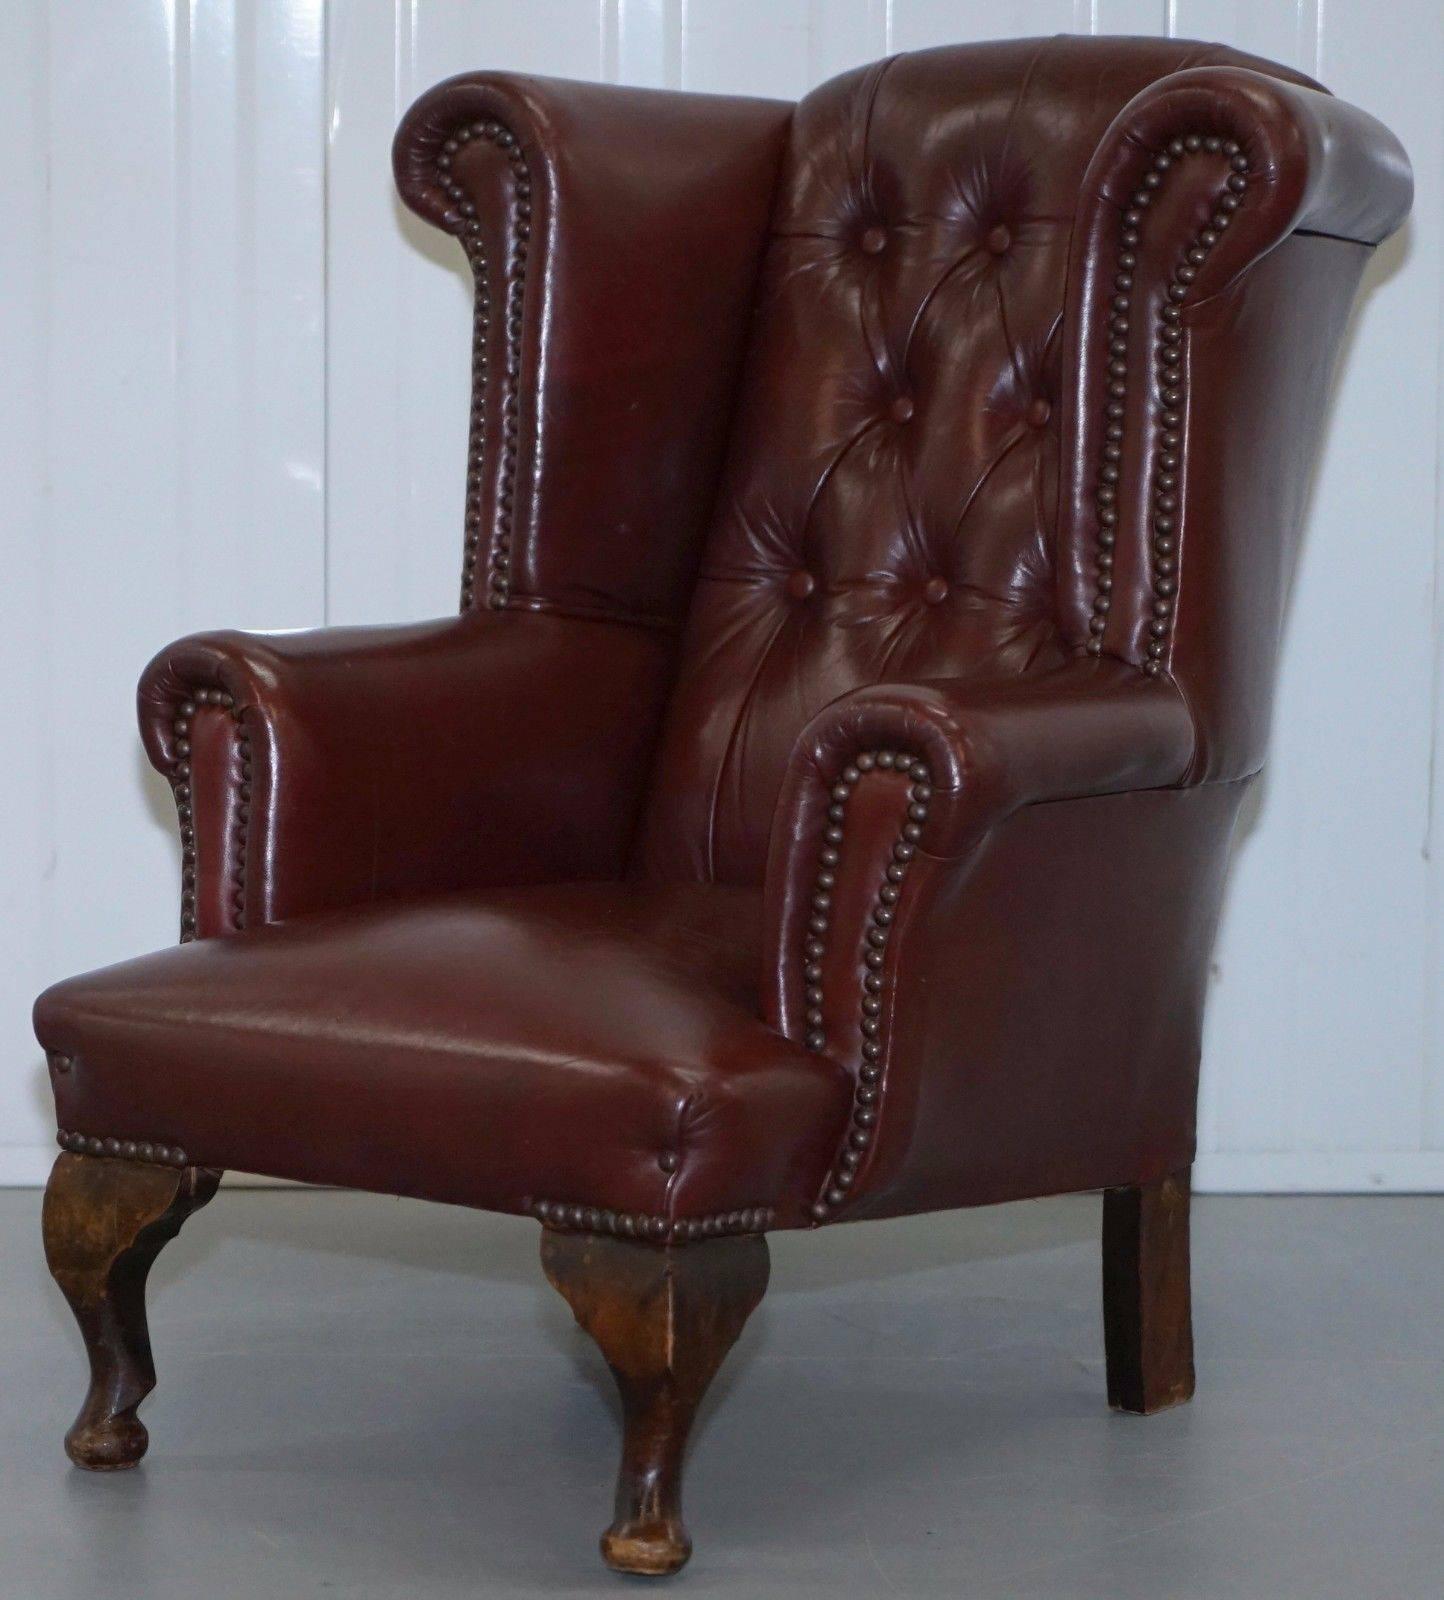 British Rare Vintage Handmade in England Children’s Chesterfield Wingback Armchair Small